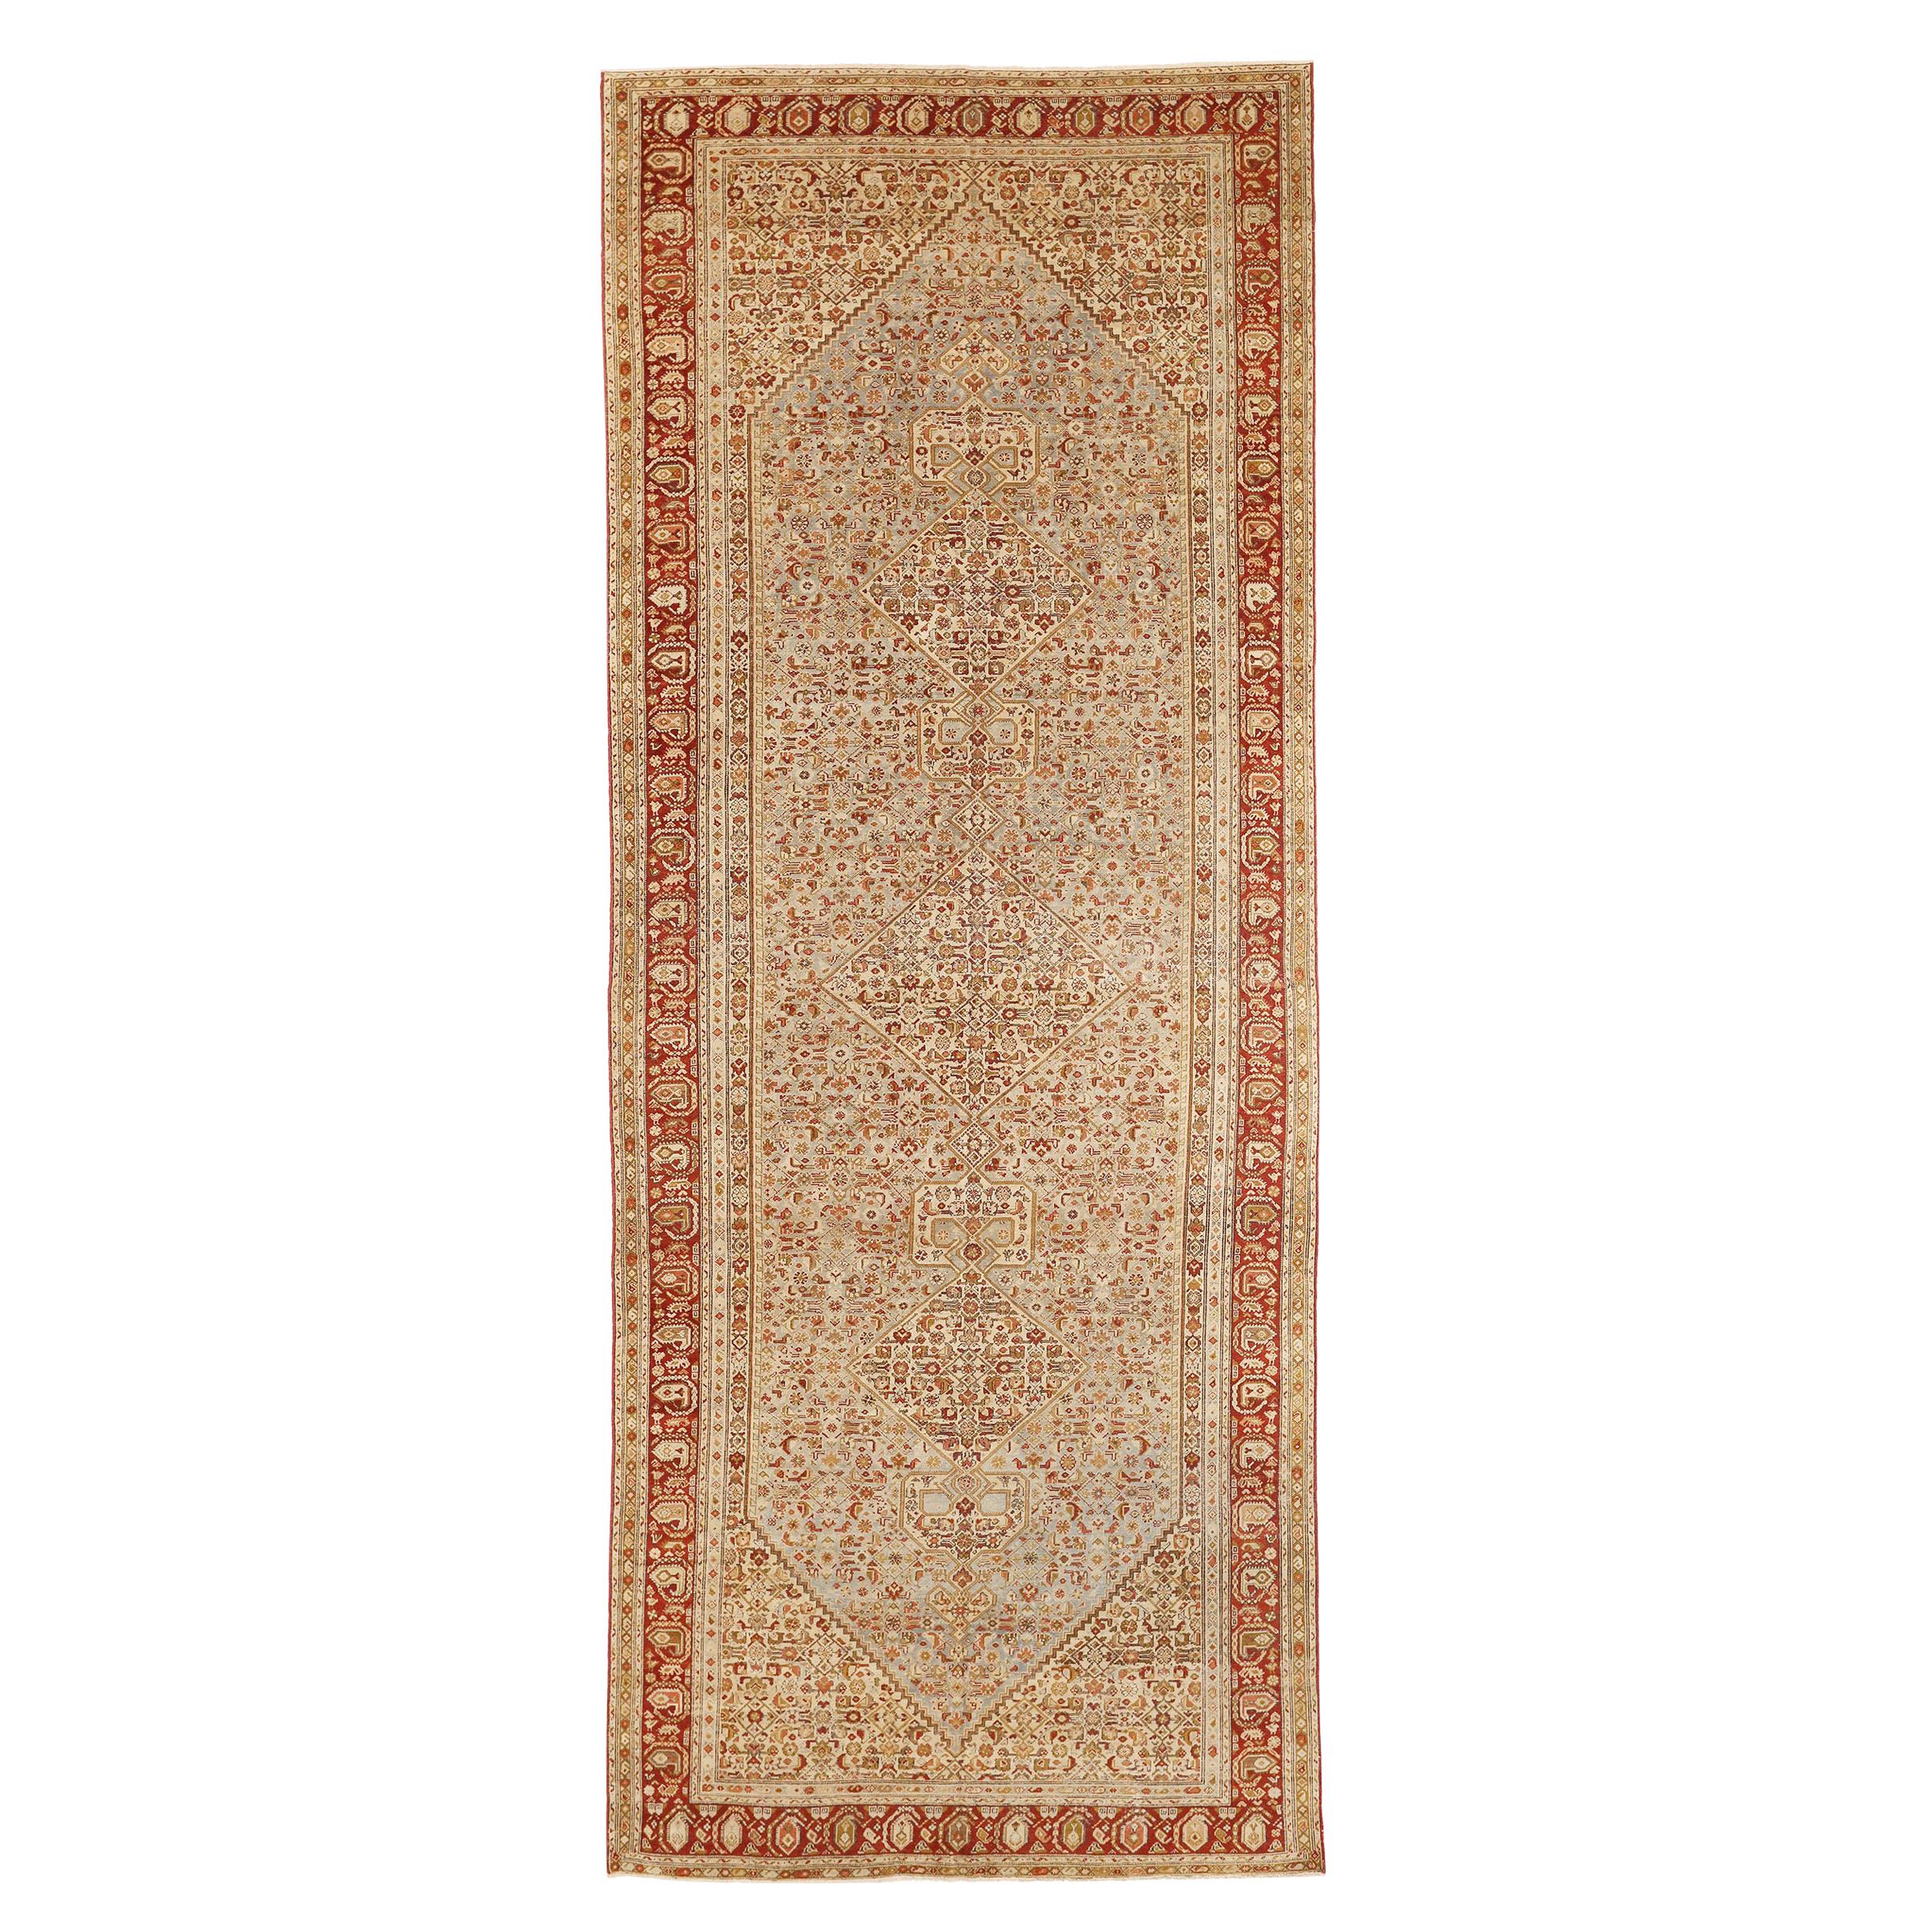 Antique Persian Malayer Rug with Red & Brown Tribal Details on Ivory Field